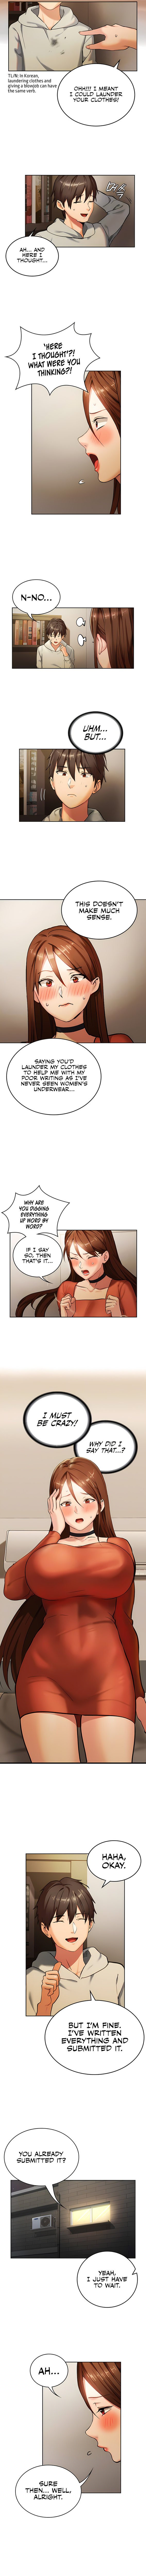 The Girl Next Door - Chapter 6 Page 2